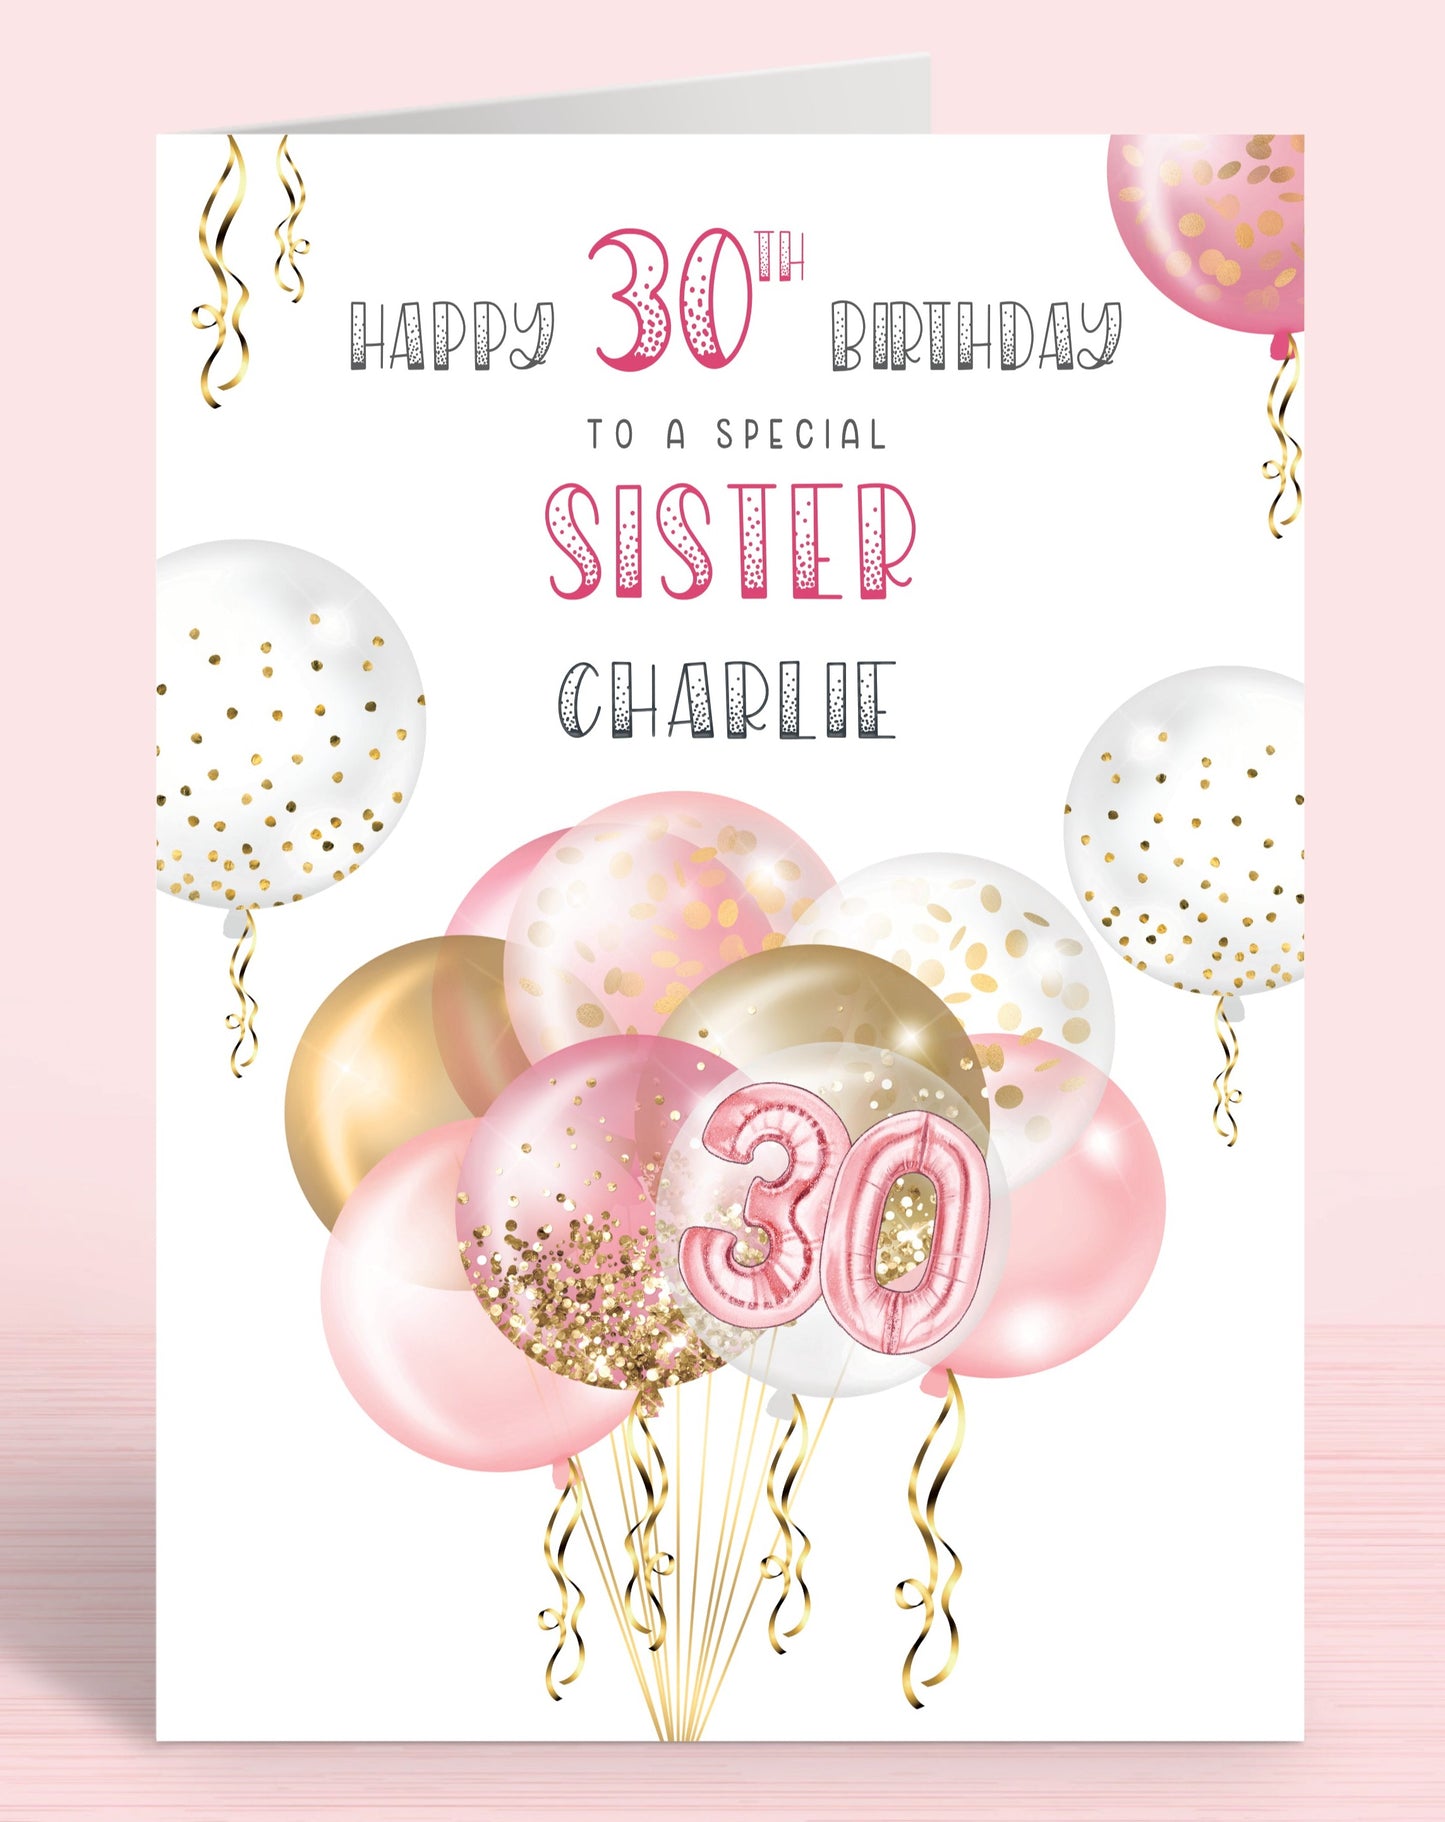 Pink Balloons Birthday Card, Sister Birthday Card, Personalised Birthday Card for Women, 30th Birthday Card for Her, Any Age, Any Age, Any Relation | Oliver Rose Designs